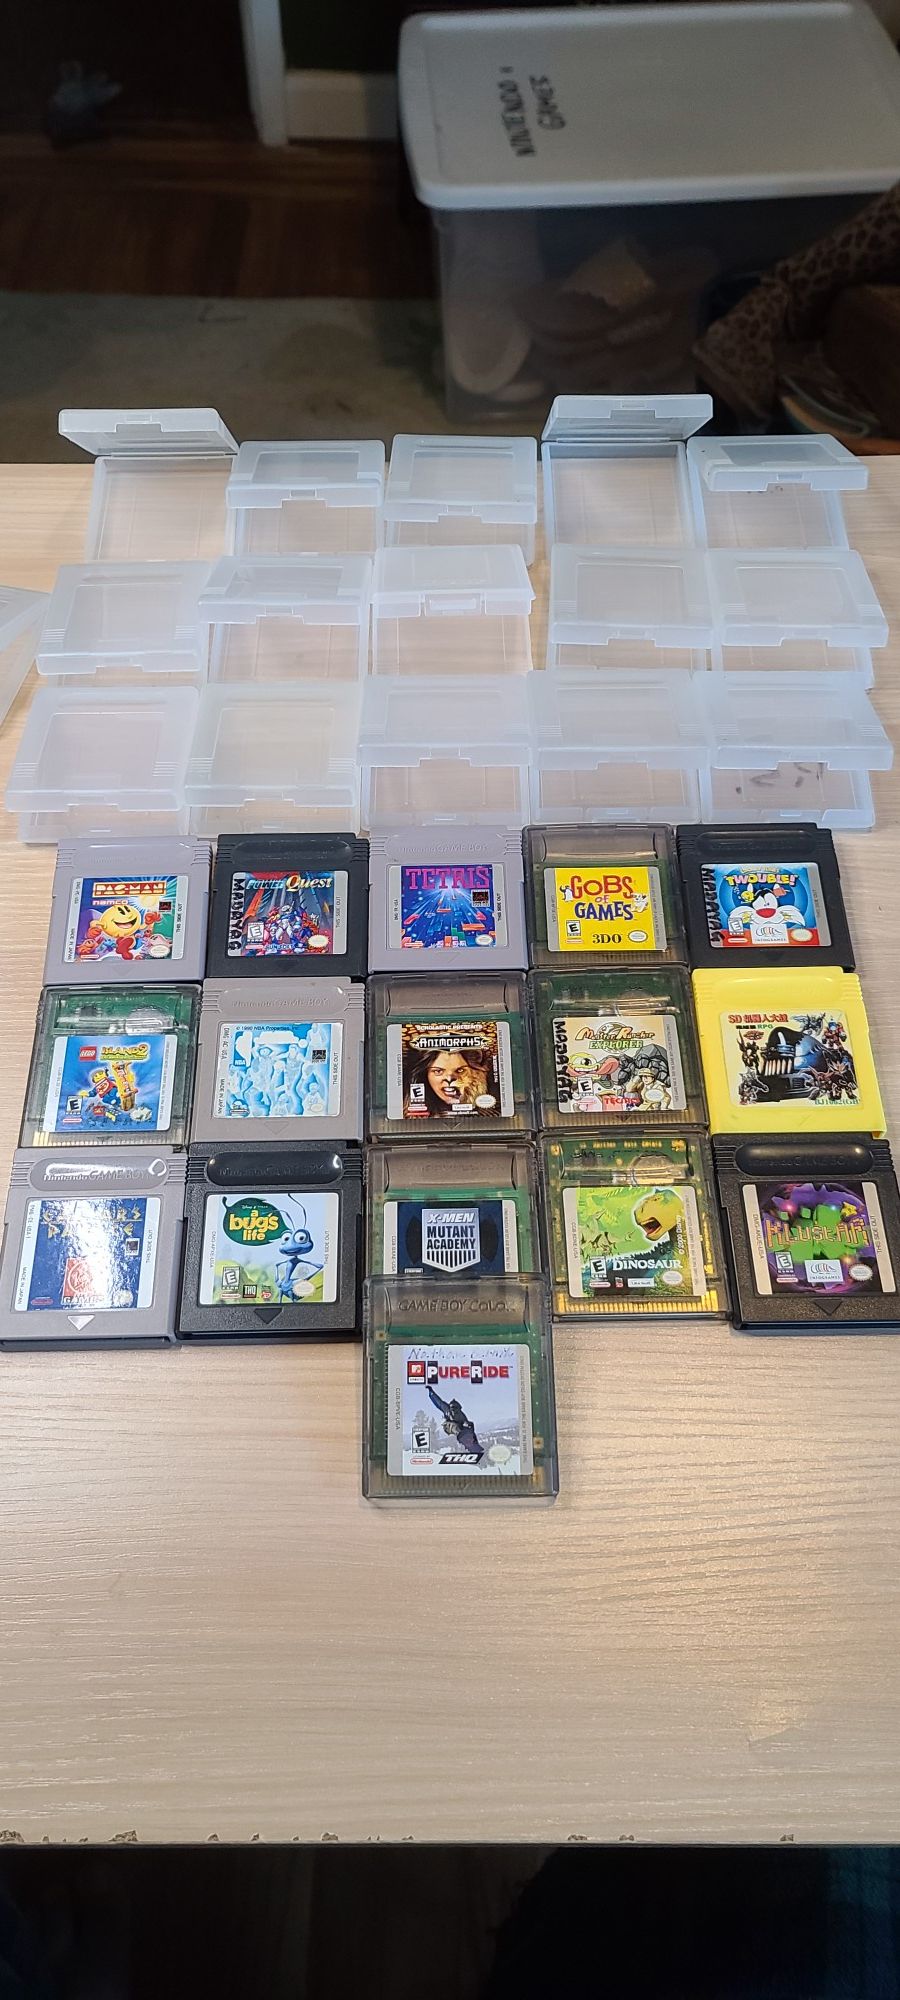 16 Gameboy and Gameboy Color games for trade.